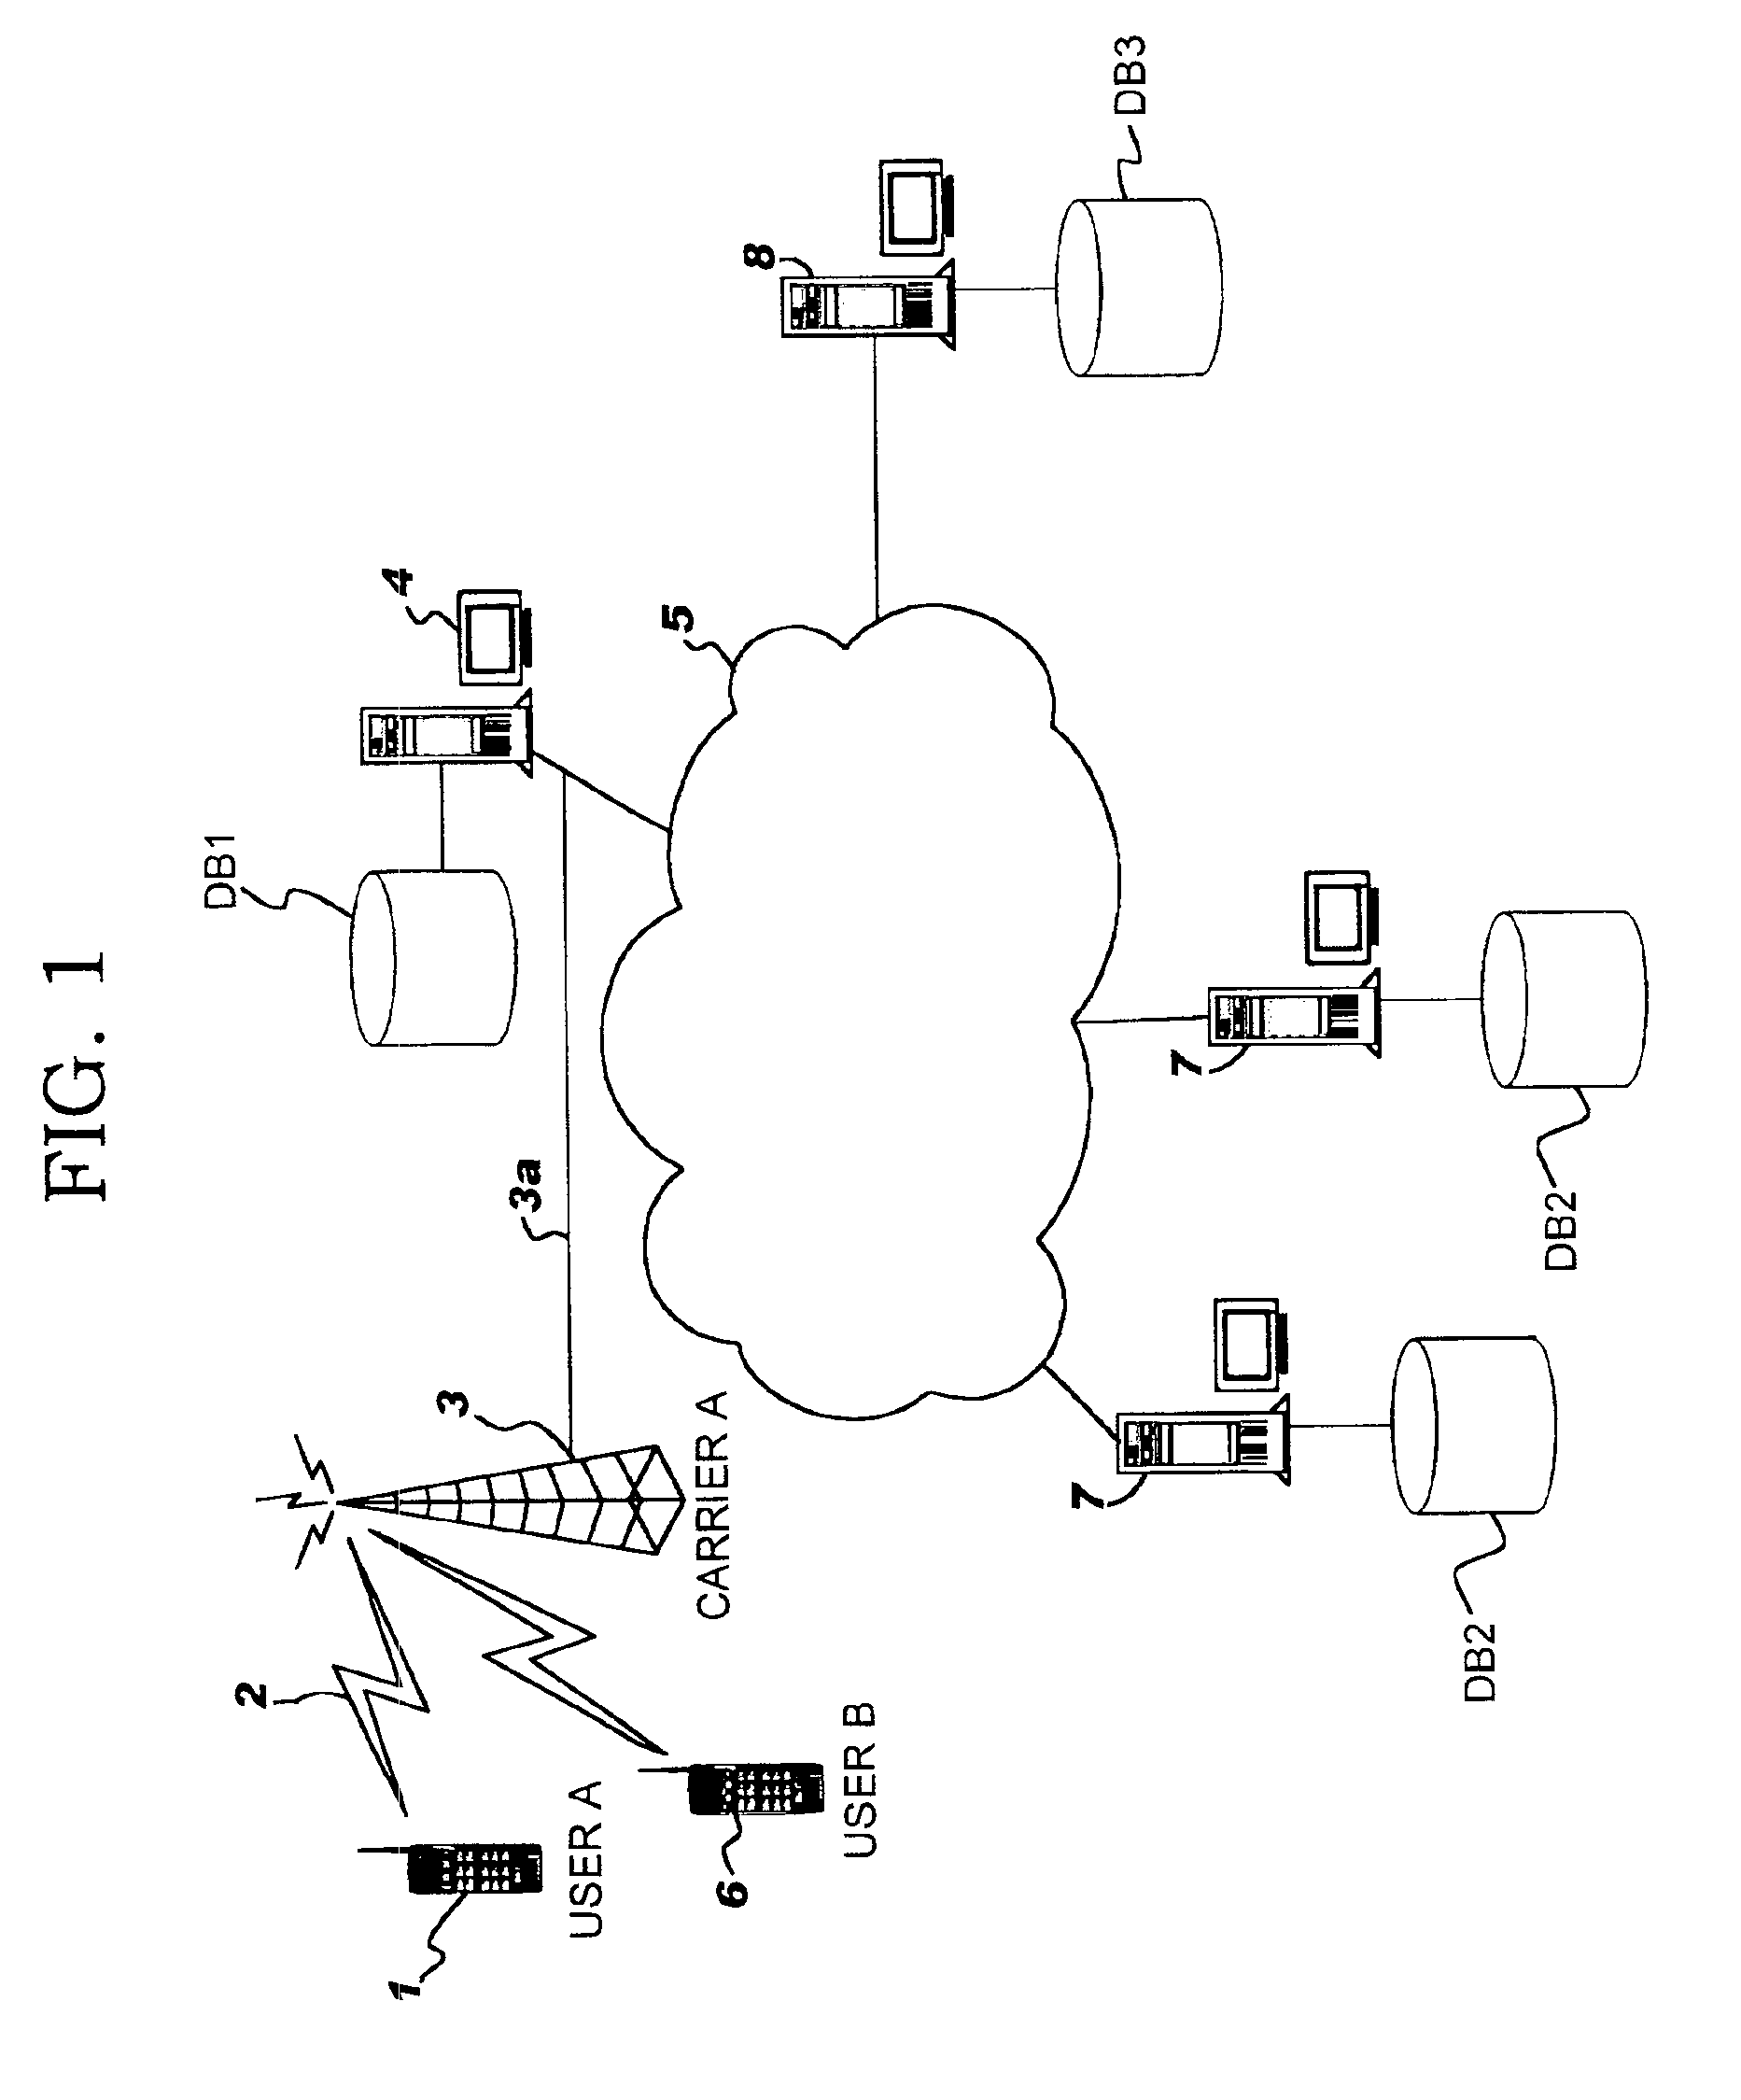 Method and system for presentation of content from one cellular phone to another through a computer network